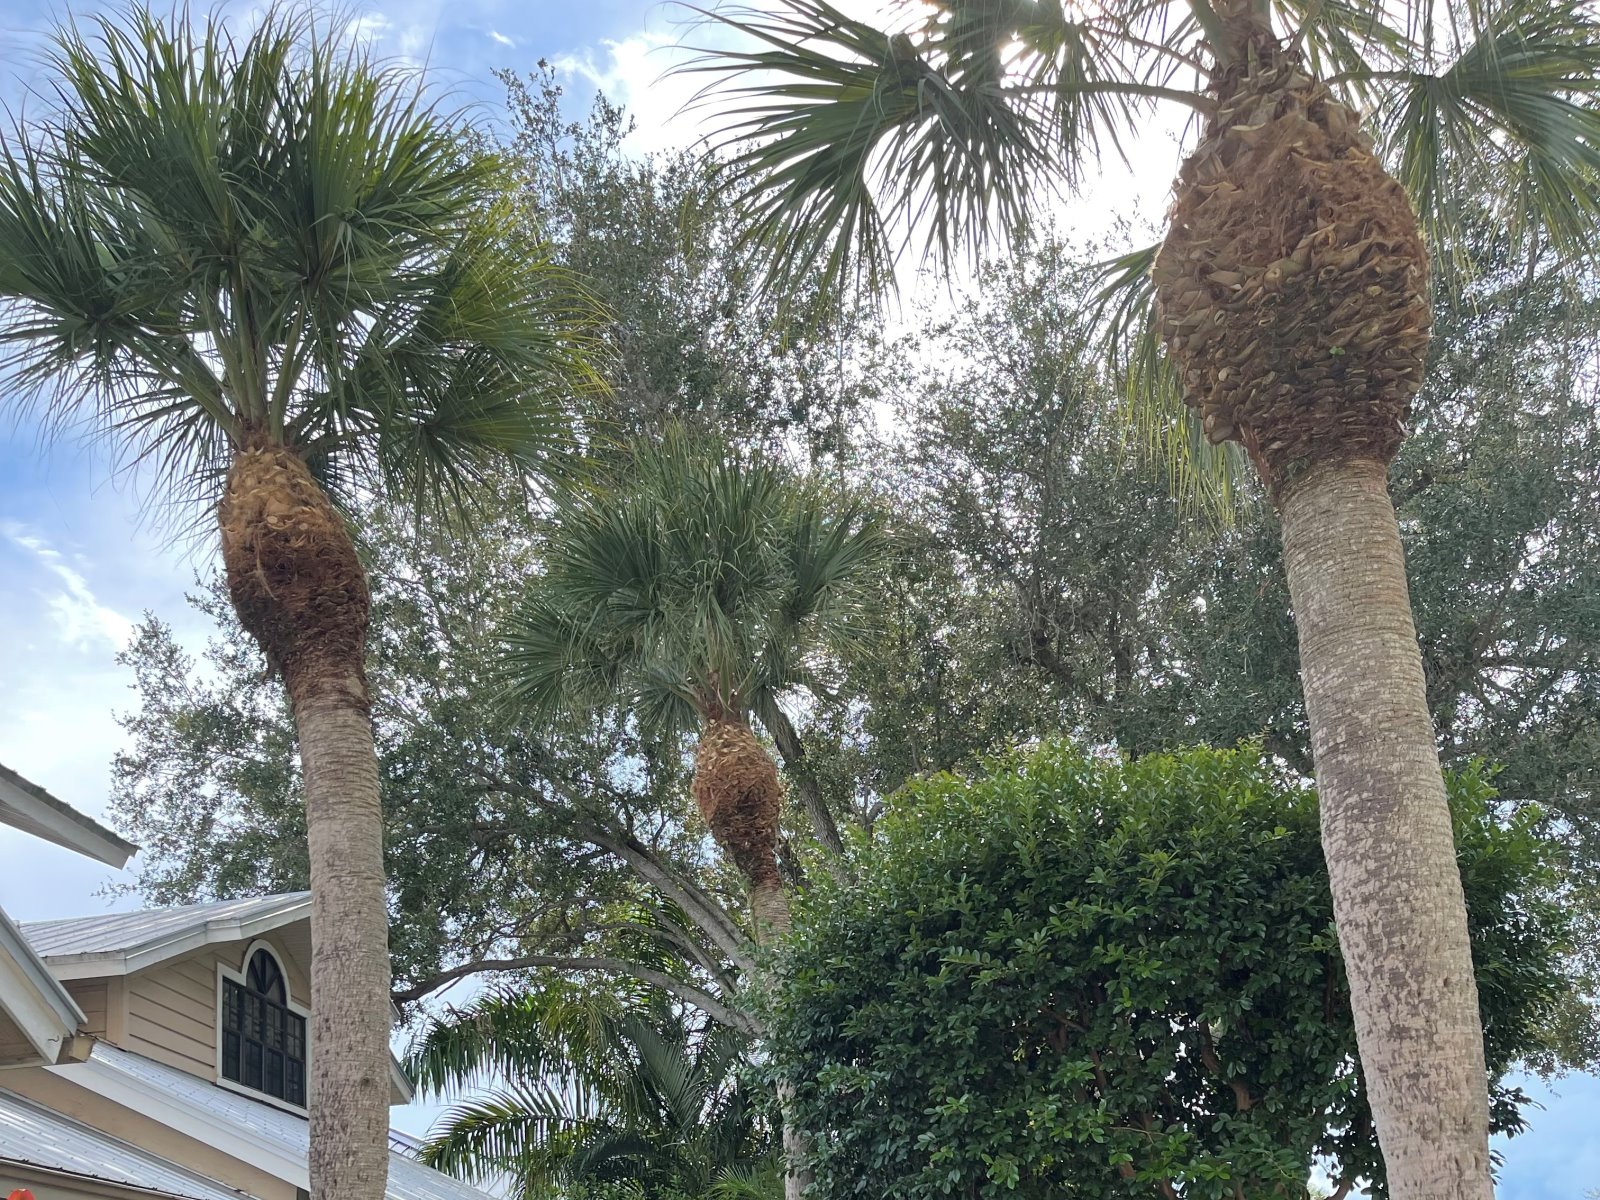 Naples, Florida tree trimming service contractor with over 10 years of experience.